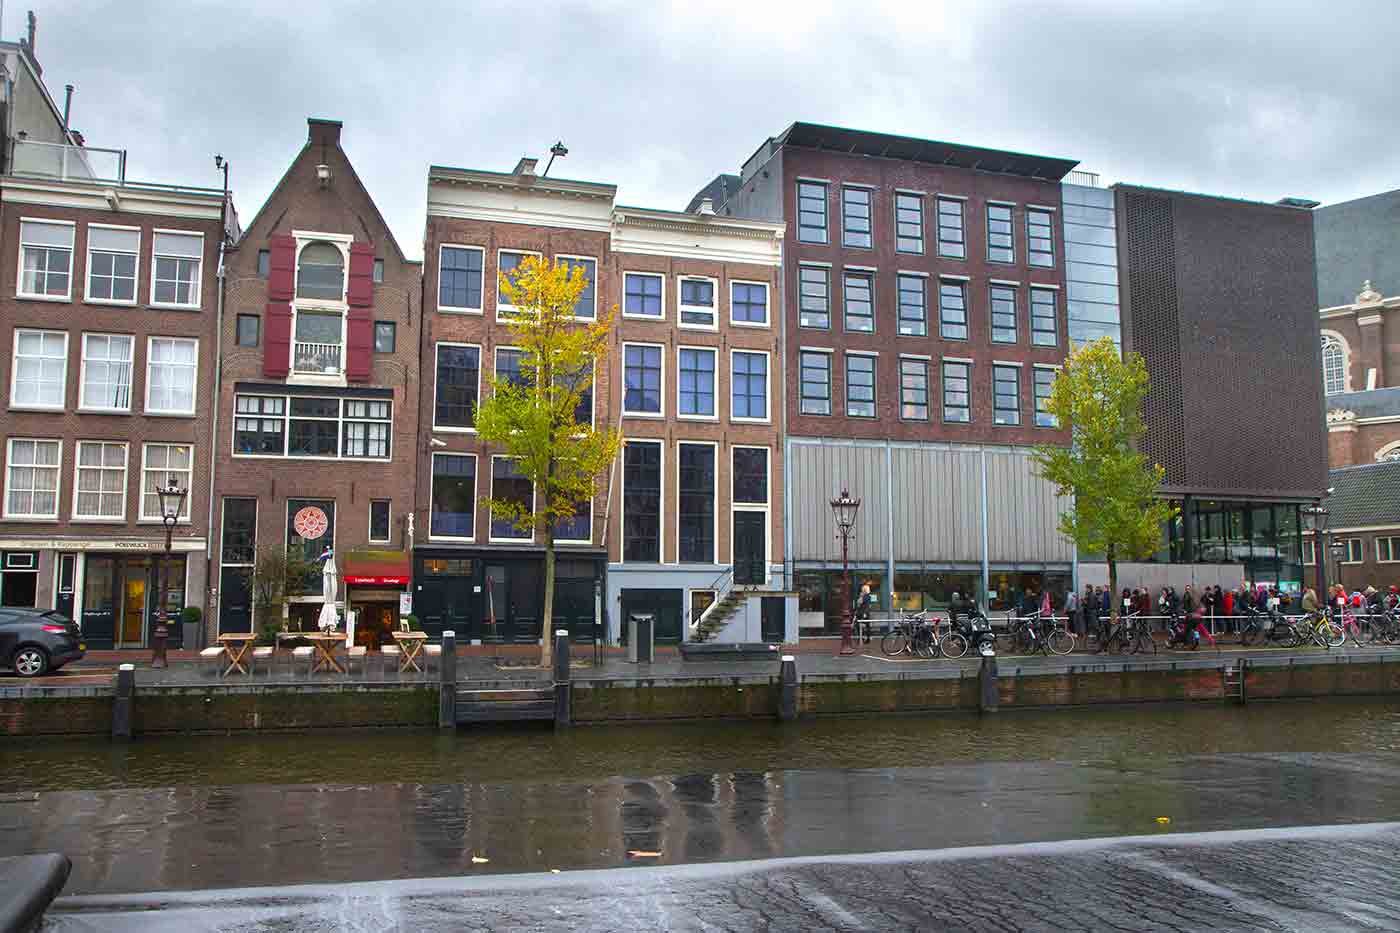 110+ Things to Do in Amsterdam - Top Tourist Attractions in Amsterdam